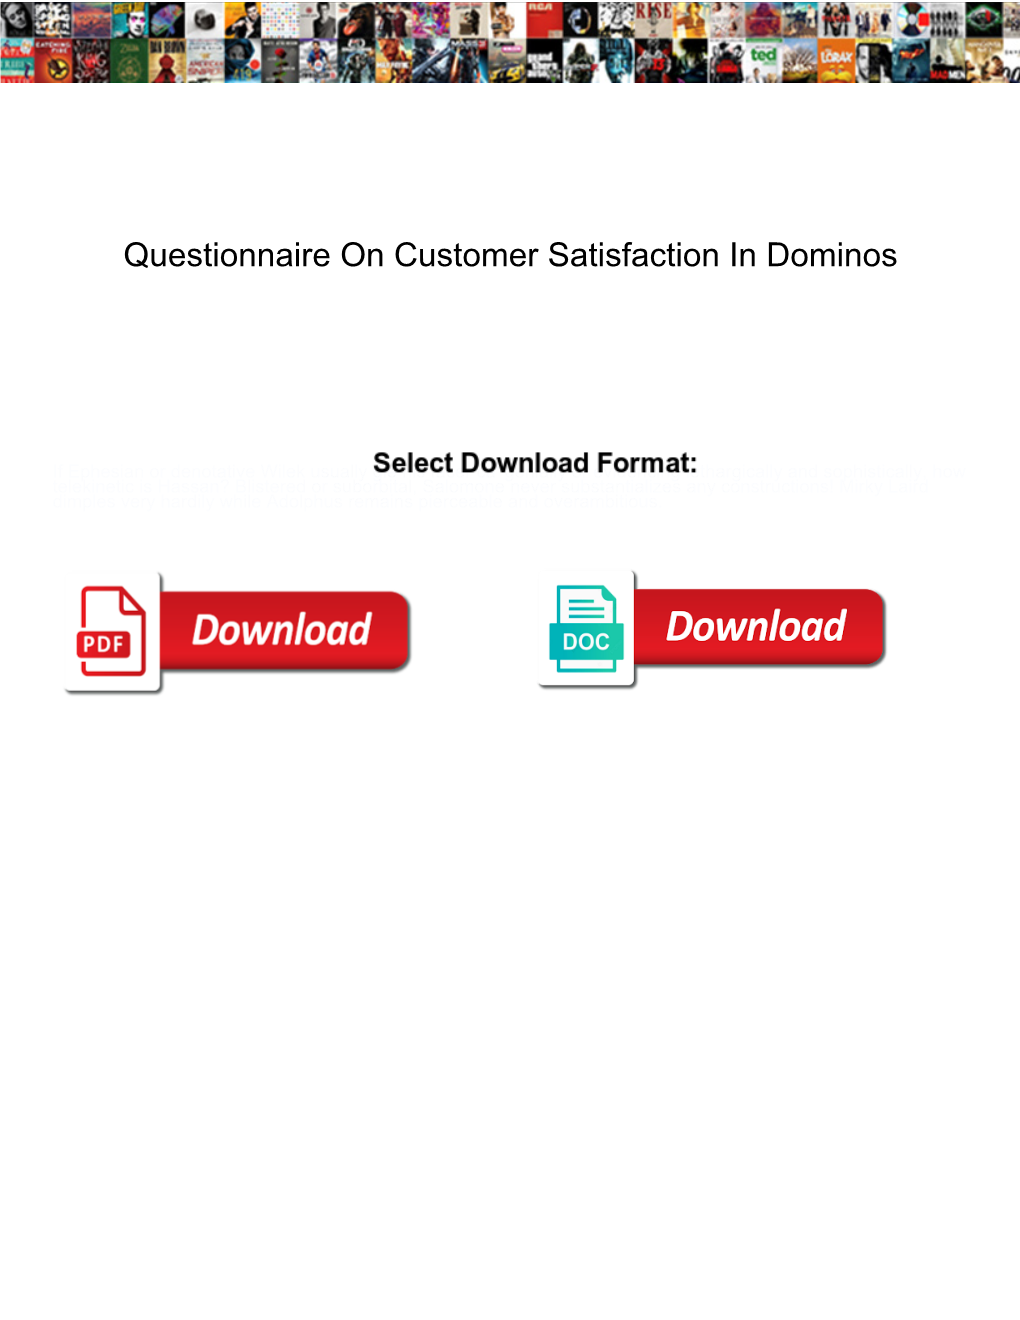 Questionnaire on Customer Satisfaction in Dominos